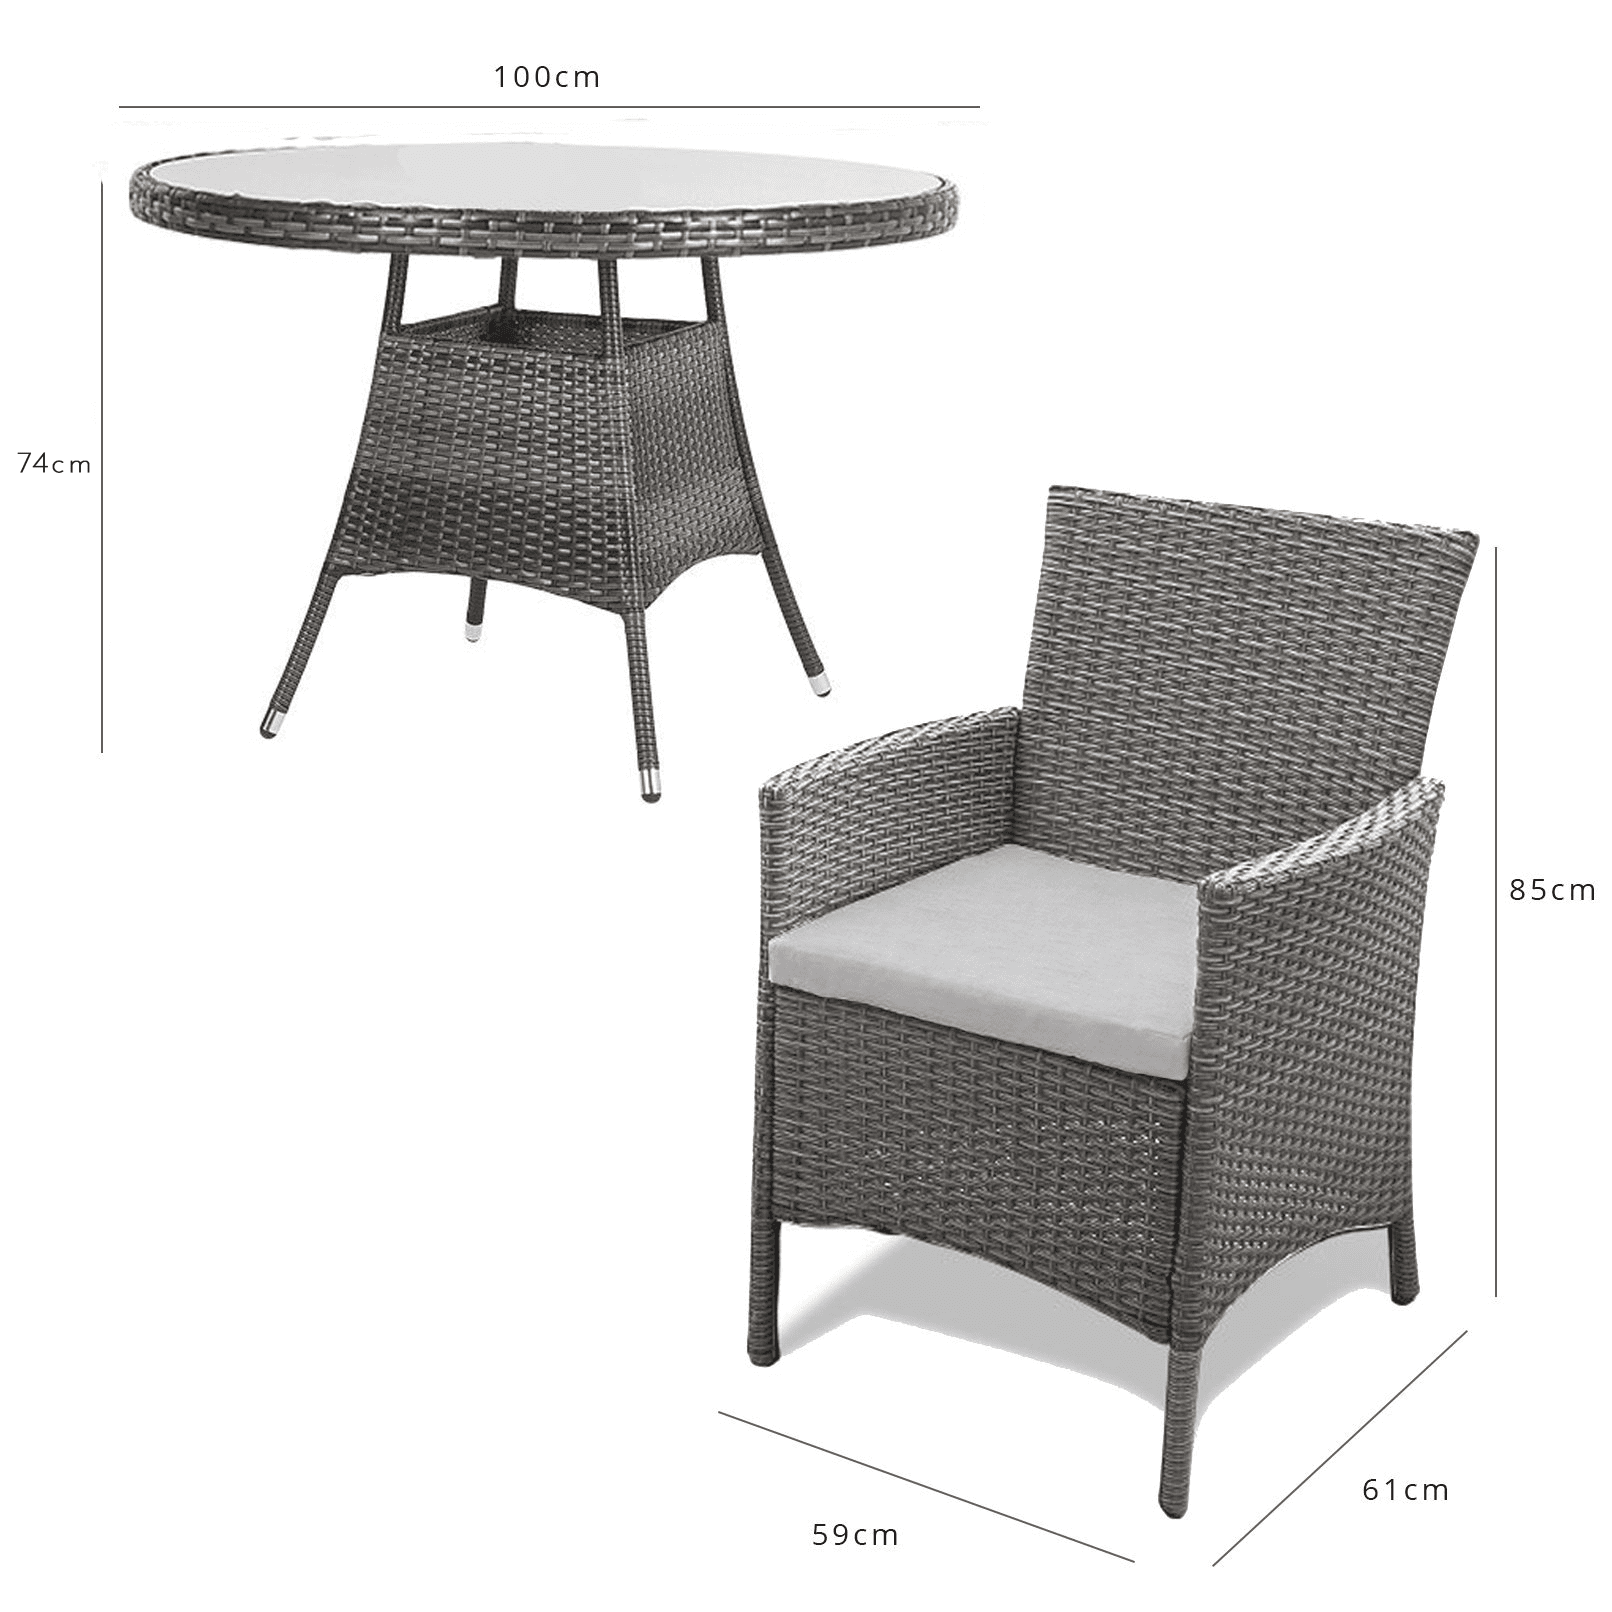 Kemble 4 Seater Rattan Round Dining Set in Grey with Parasol - Laura James